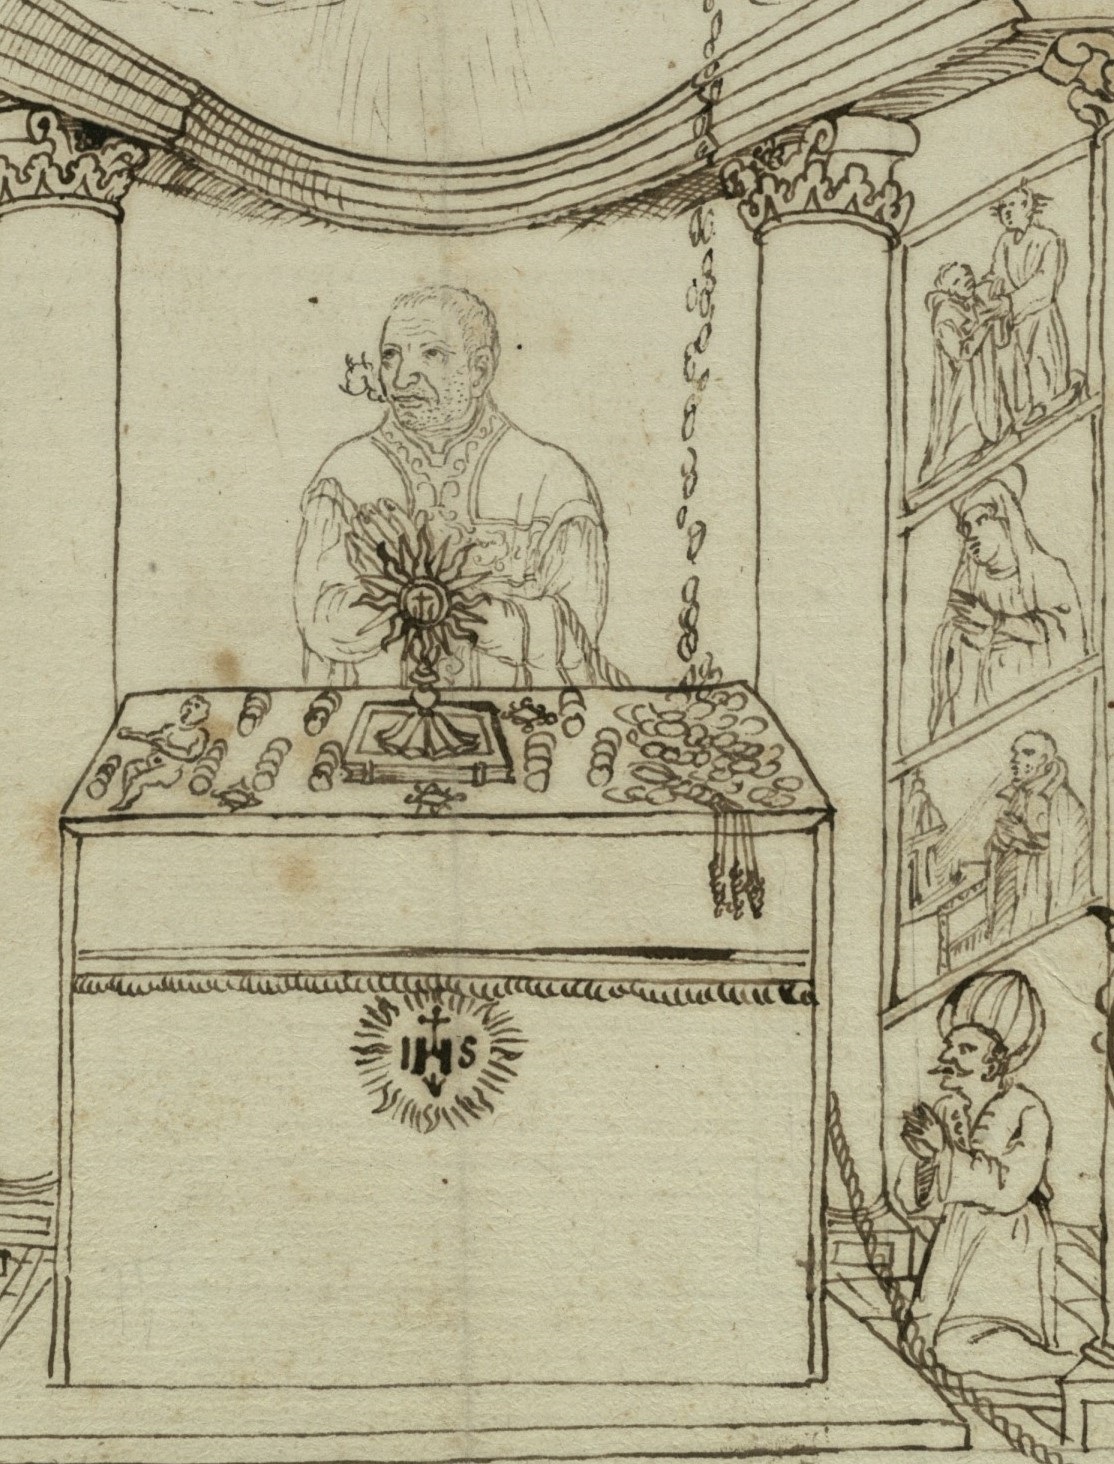 focus on Giulio Mancinelli from manuscript page